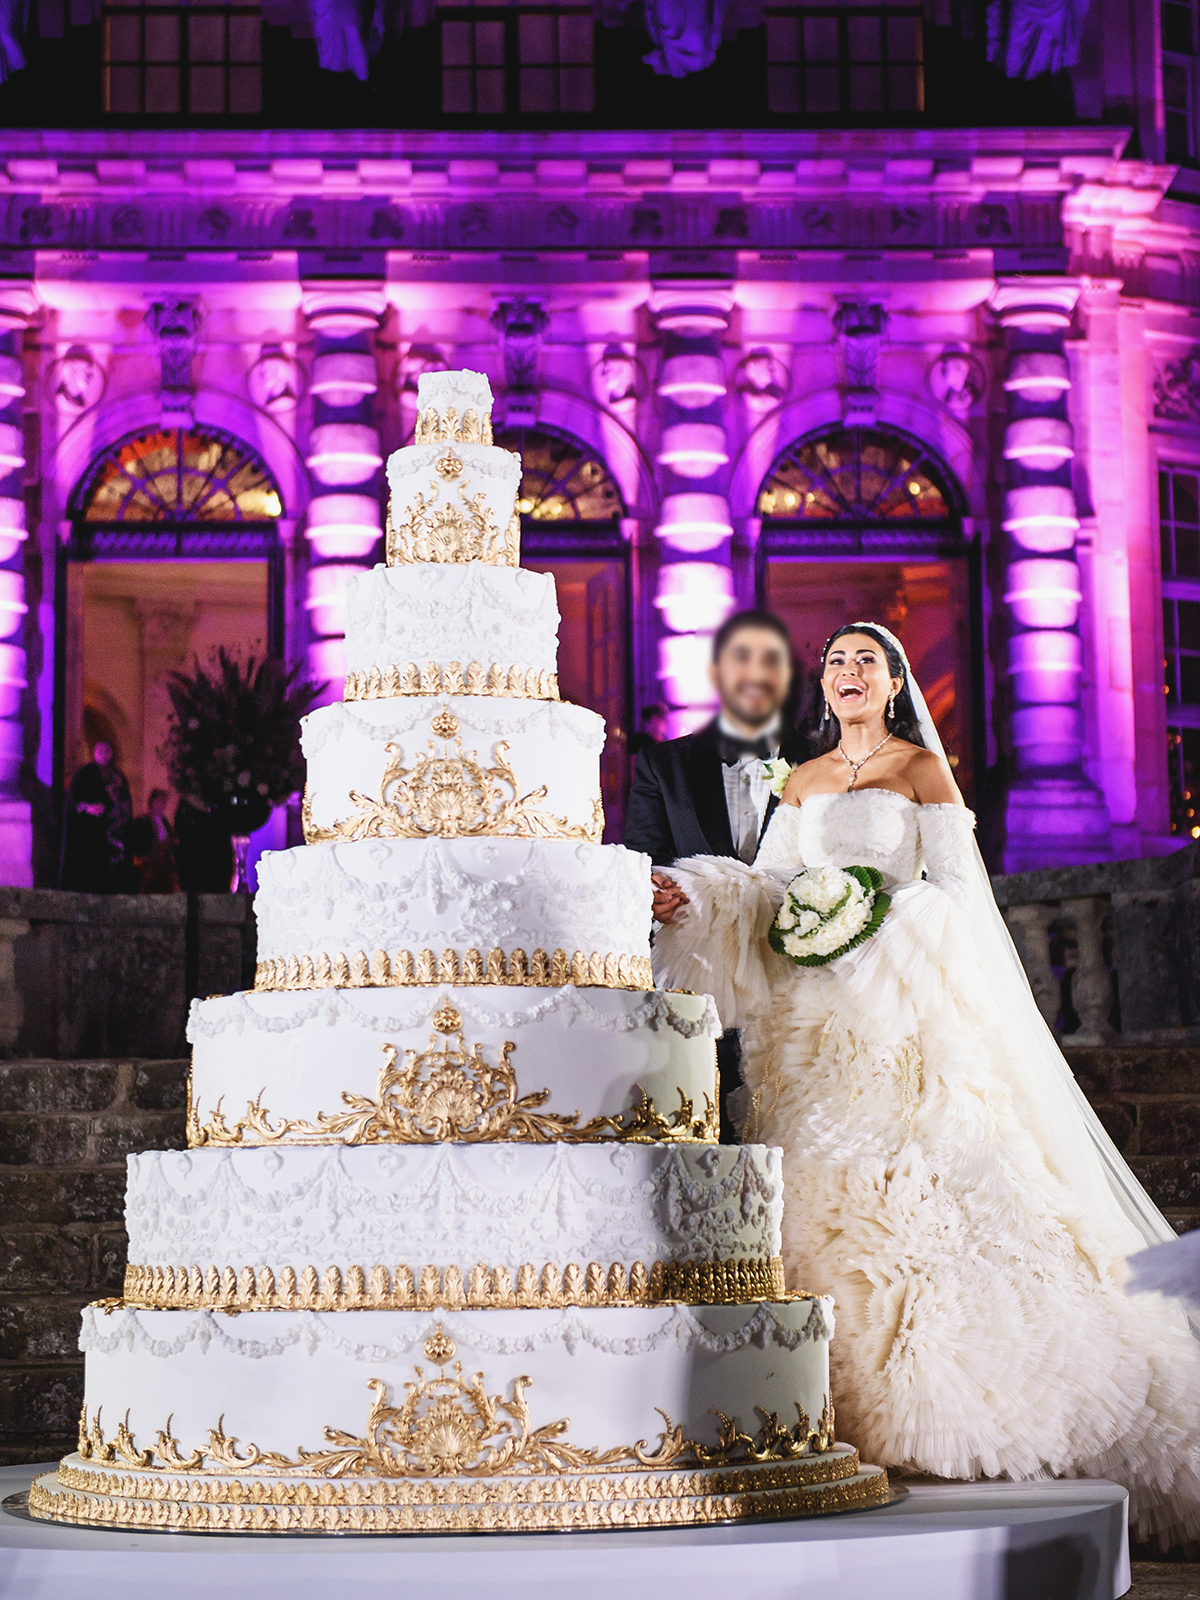 Bride and groom standing behind very tall white and gold wedding cake